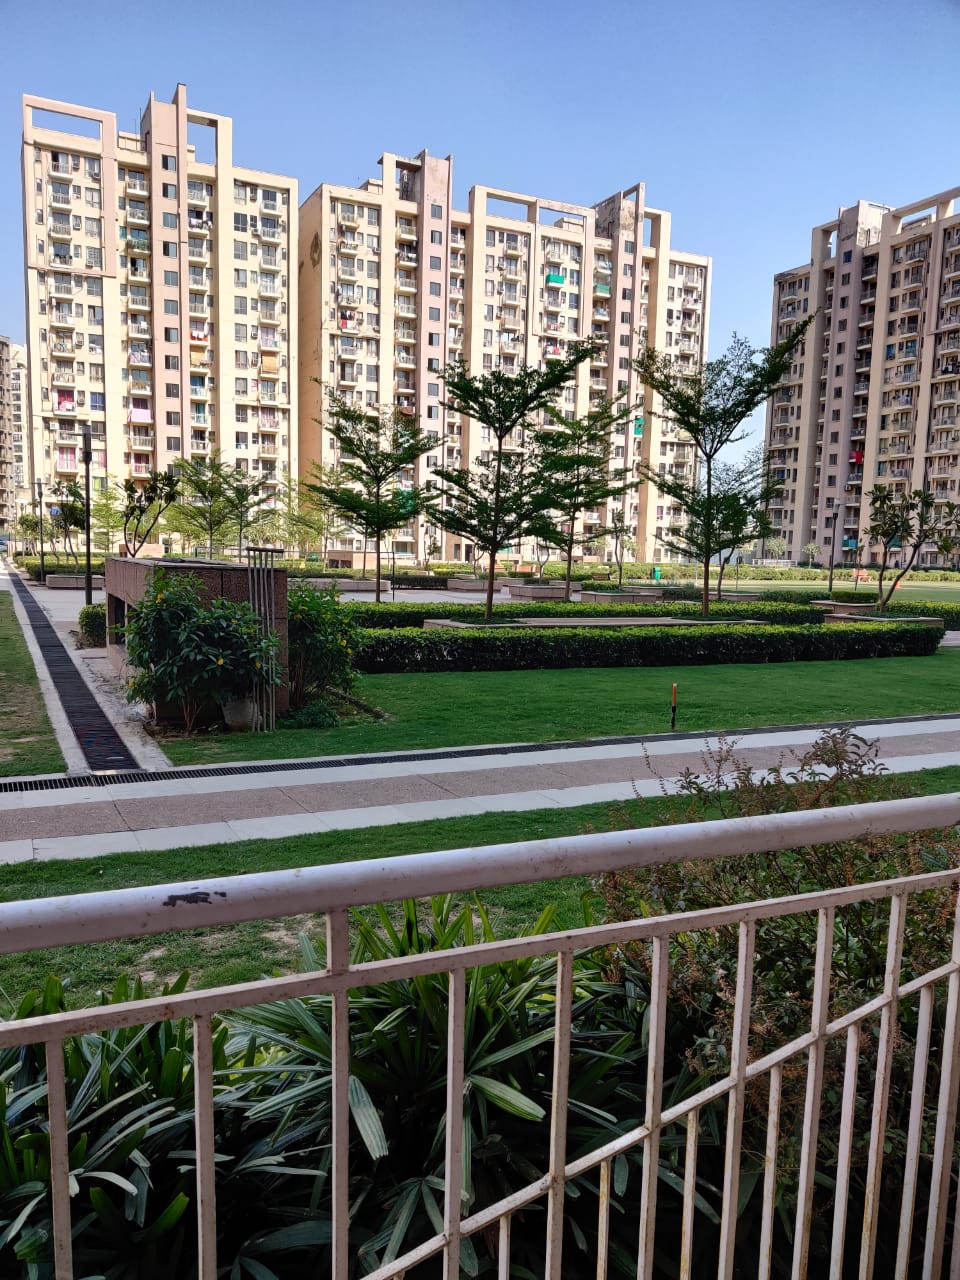 3 BHK Ready To Move Builder floor Apartment For Sale in Sushant Lok 2, Gurgaon